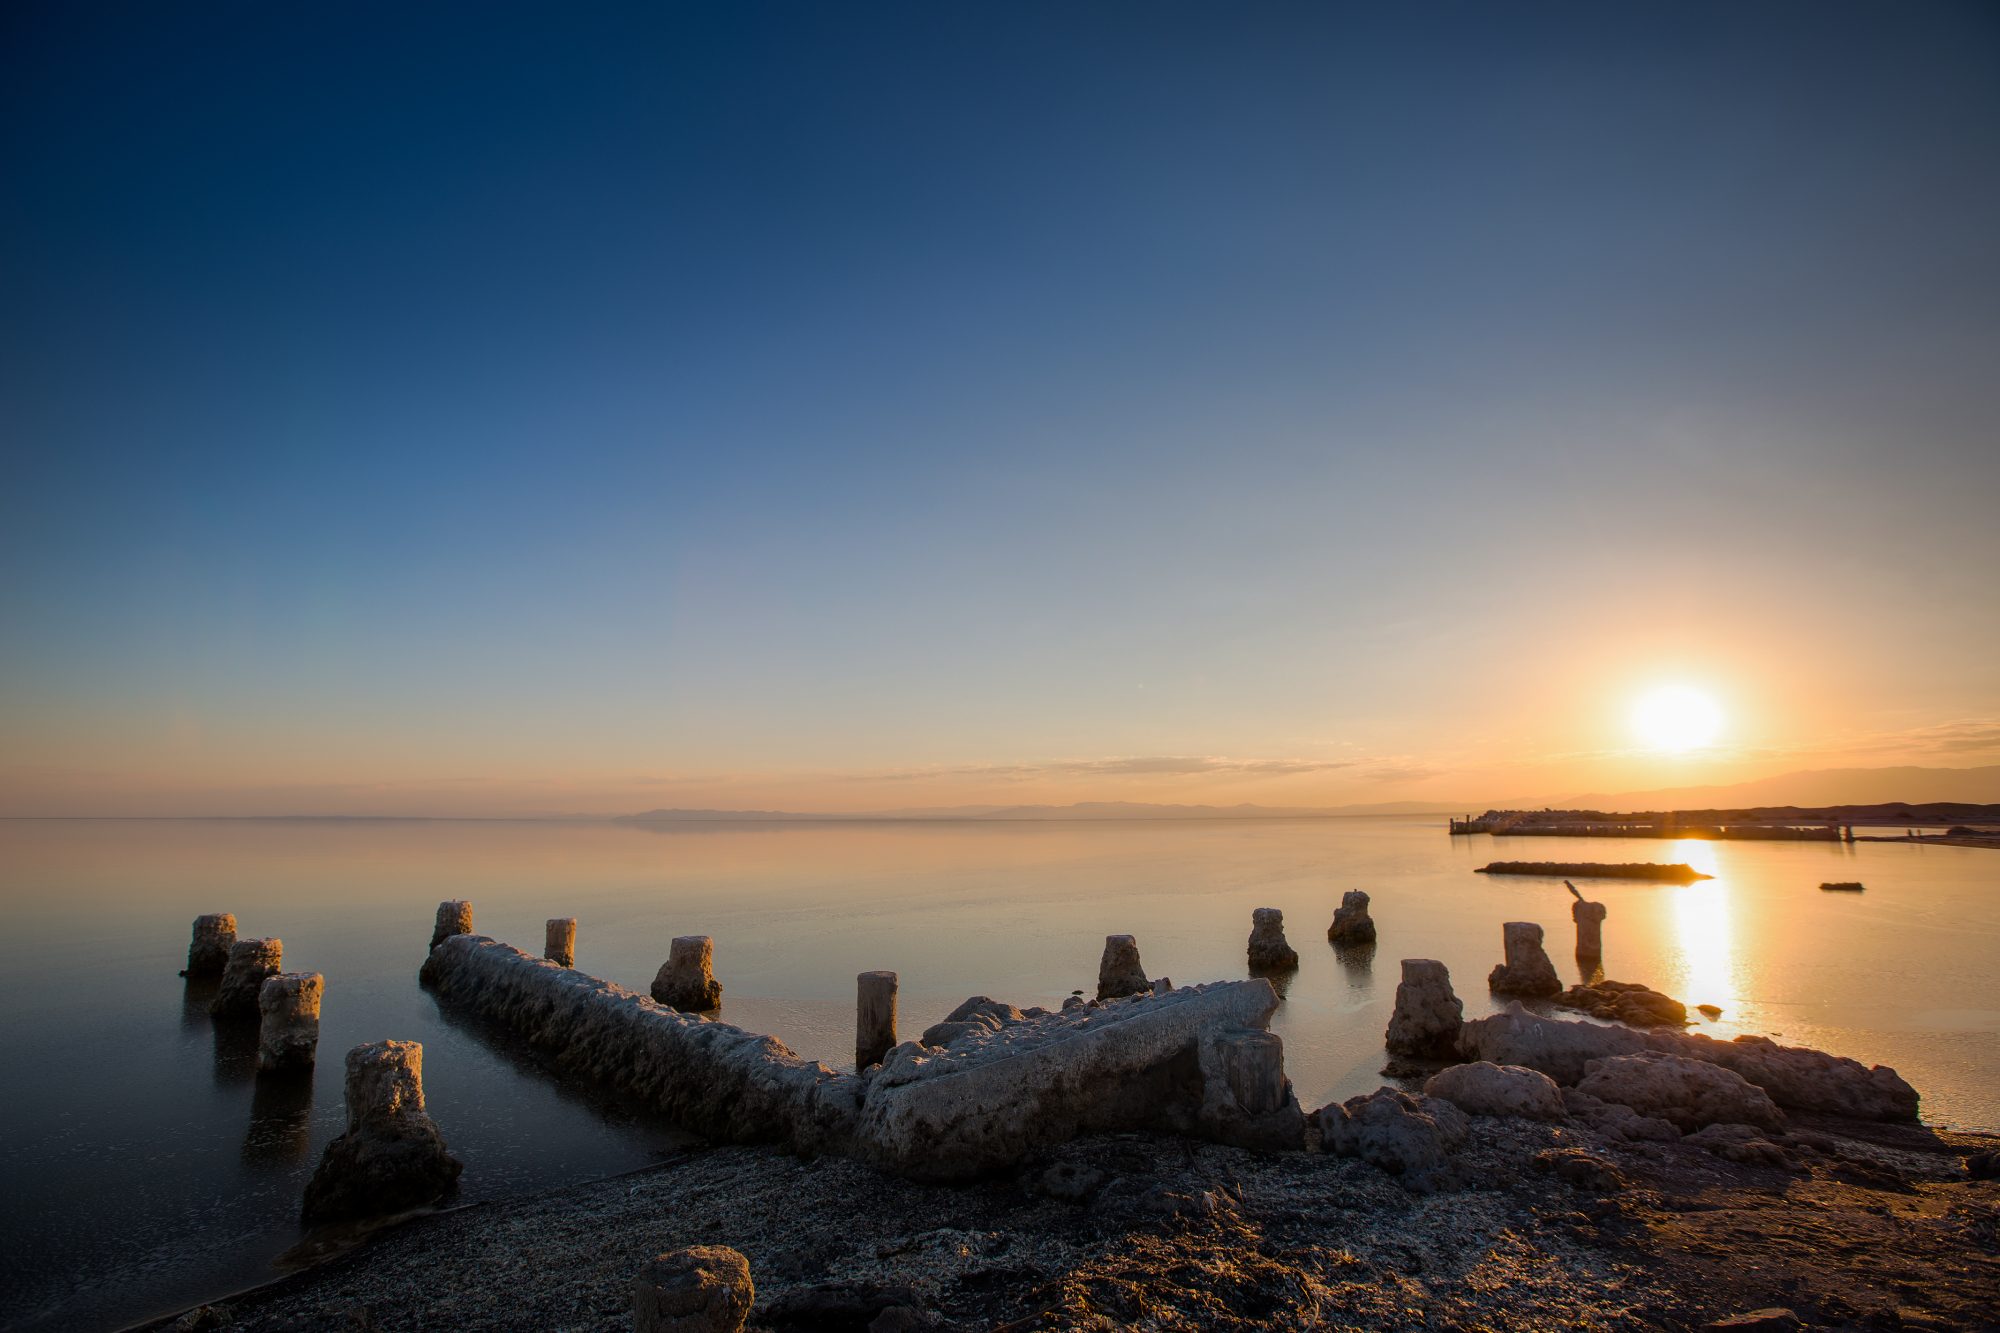 HDR Photography Workshop: Salton Sea HDR | Pt.2 | RAW Preparation and HDR Export